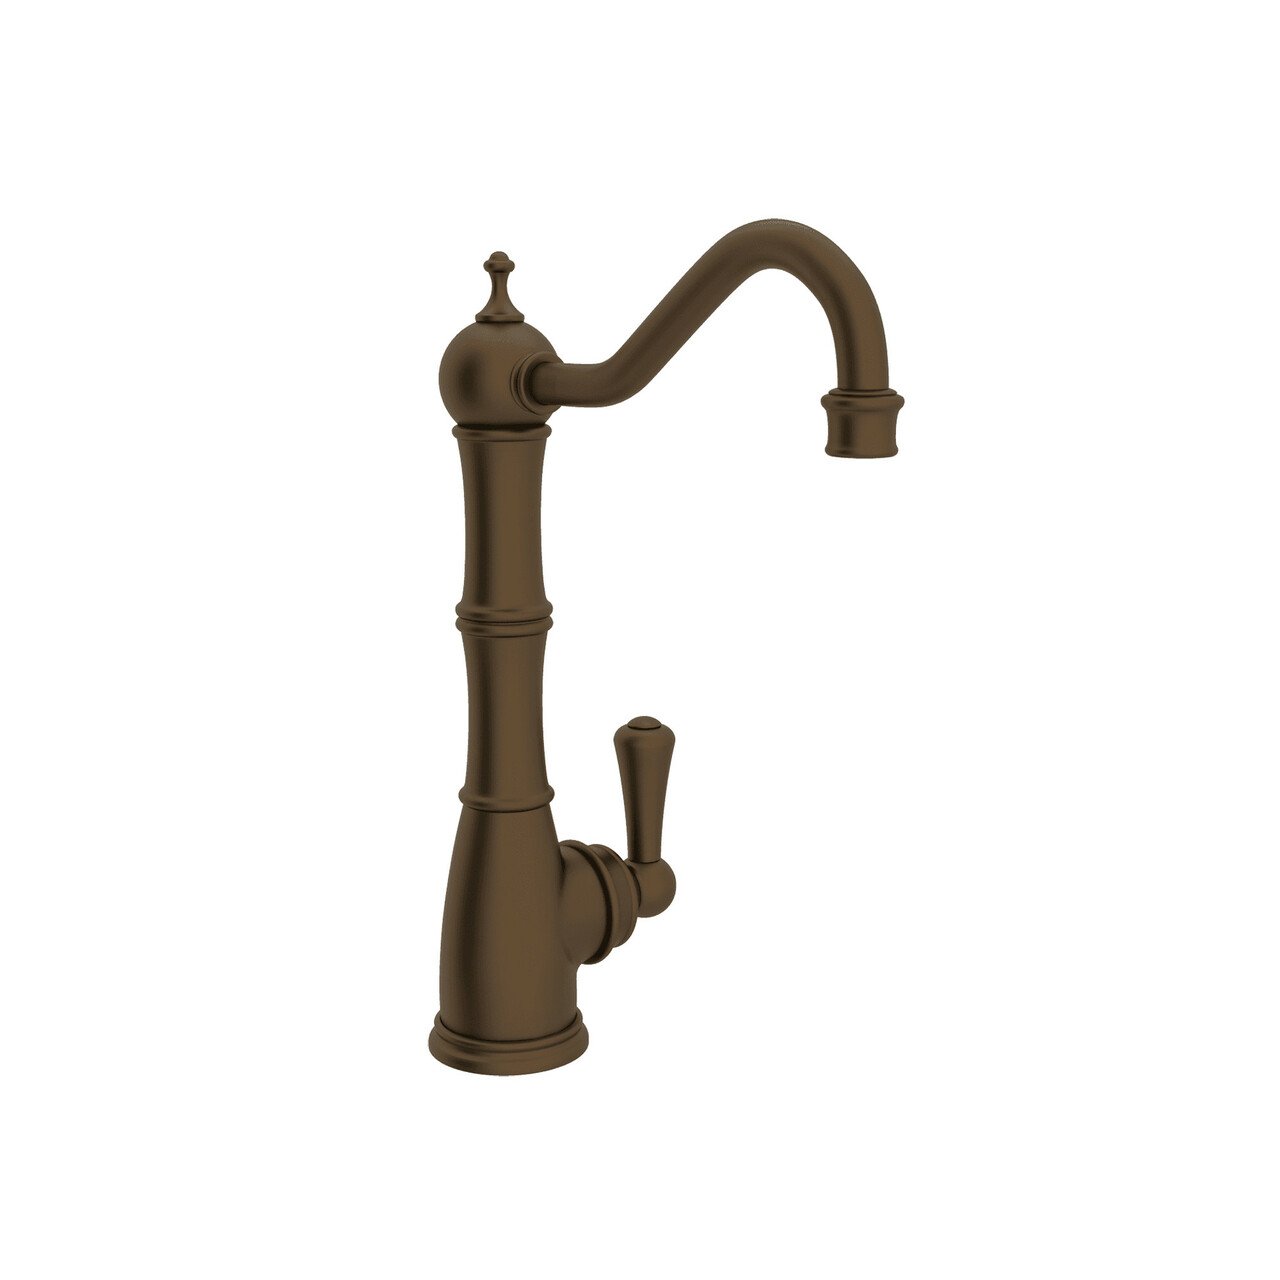 Perrin & Rowe Edwardian Column Spout Filter Faucet - BNGBath